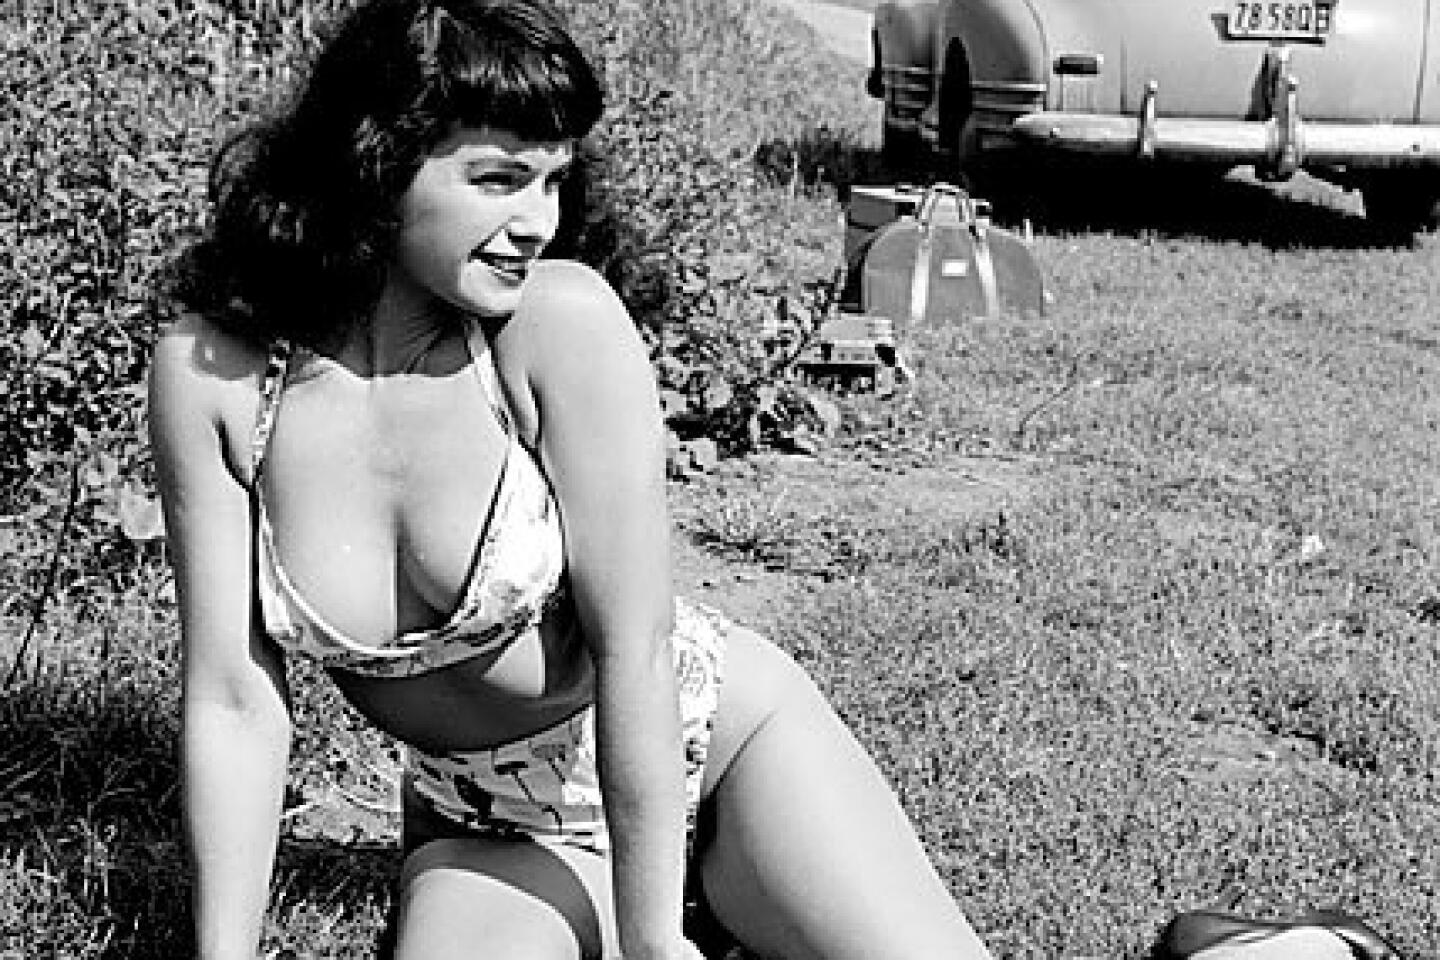 Bettie Page - Excuse me, my eyes are up here. 😜👀😻 #BettiePage #Weegee  #HumpDay #pinup #vintage #retro #boobs ~Thanks to Gary Nolt! ~